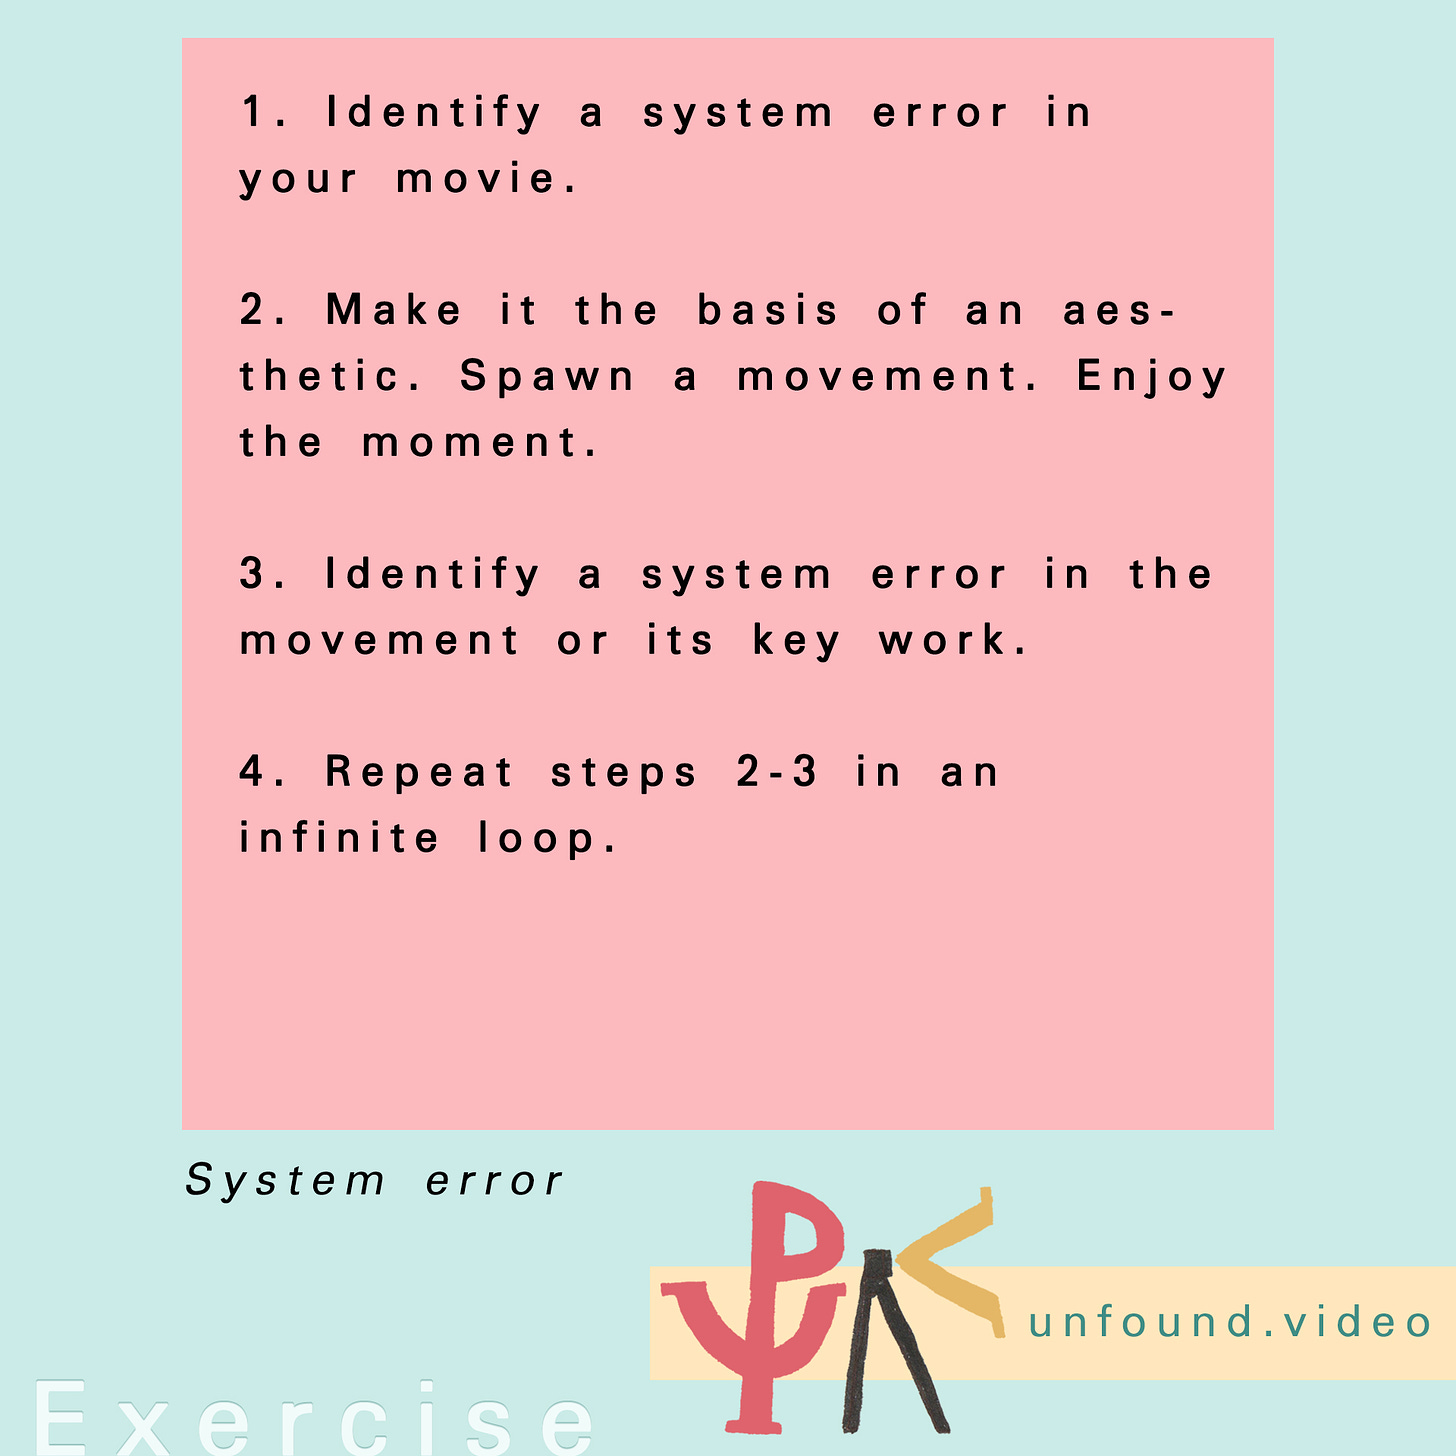 Exercise. Text reads: 1. Identify a system error in your movie.  2. Make it the basis of an aesthetic. Spawn a movement. Enjoy the moment.  3. Identify a system error in the movement or its key work.  4. Repeat steps 2-3 in an infinite loop.